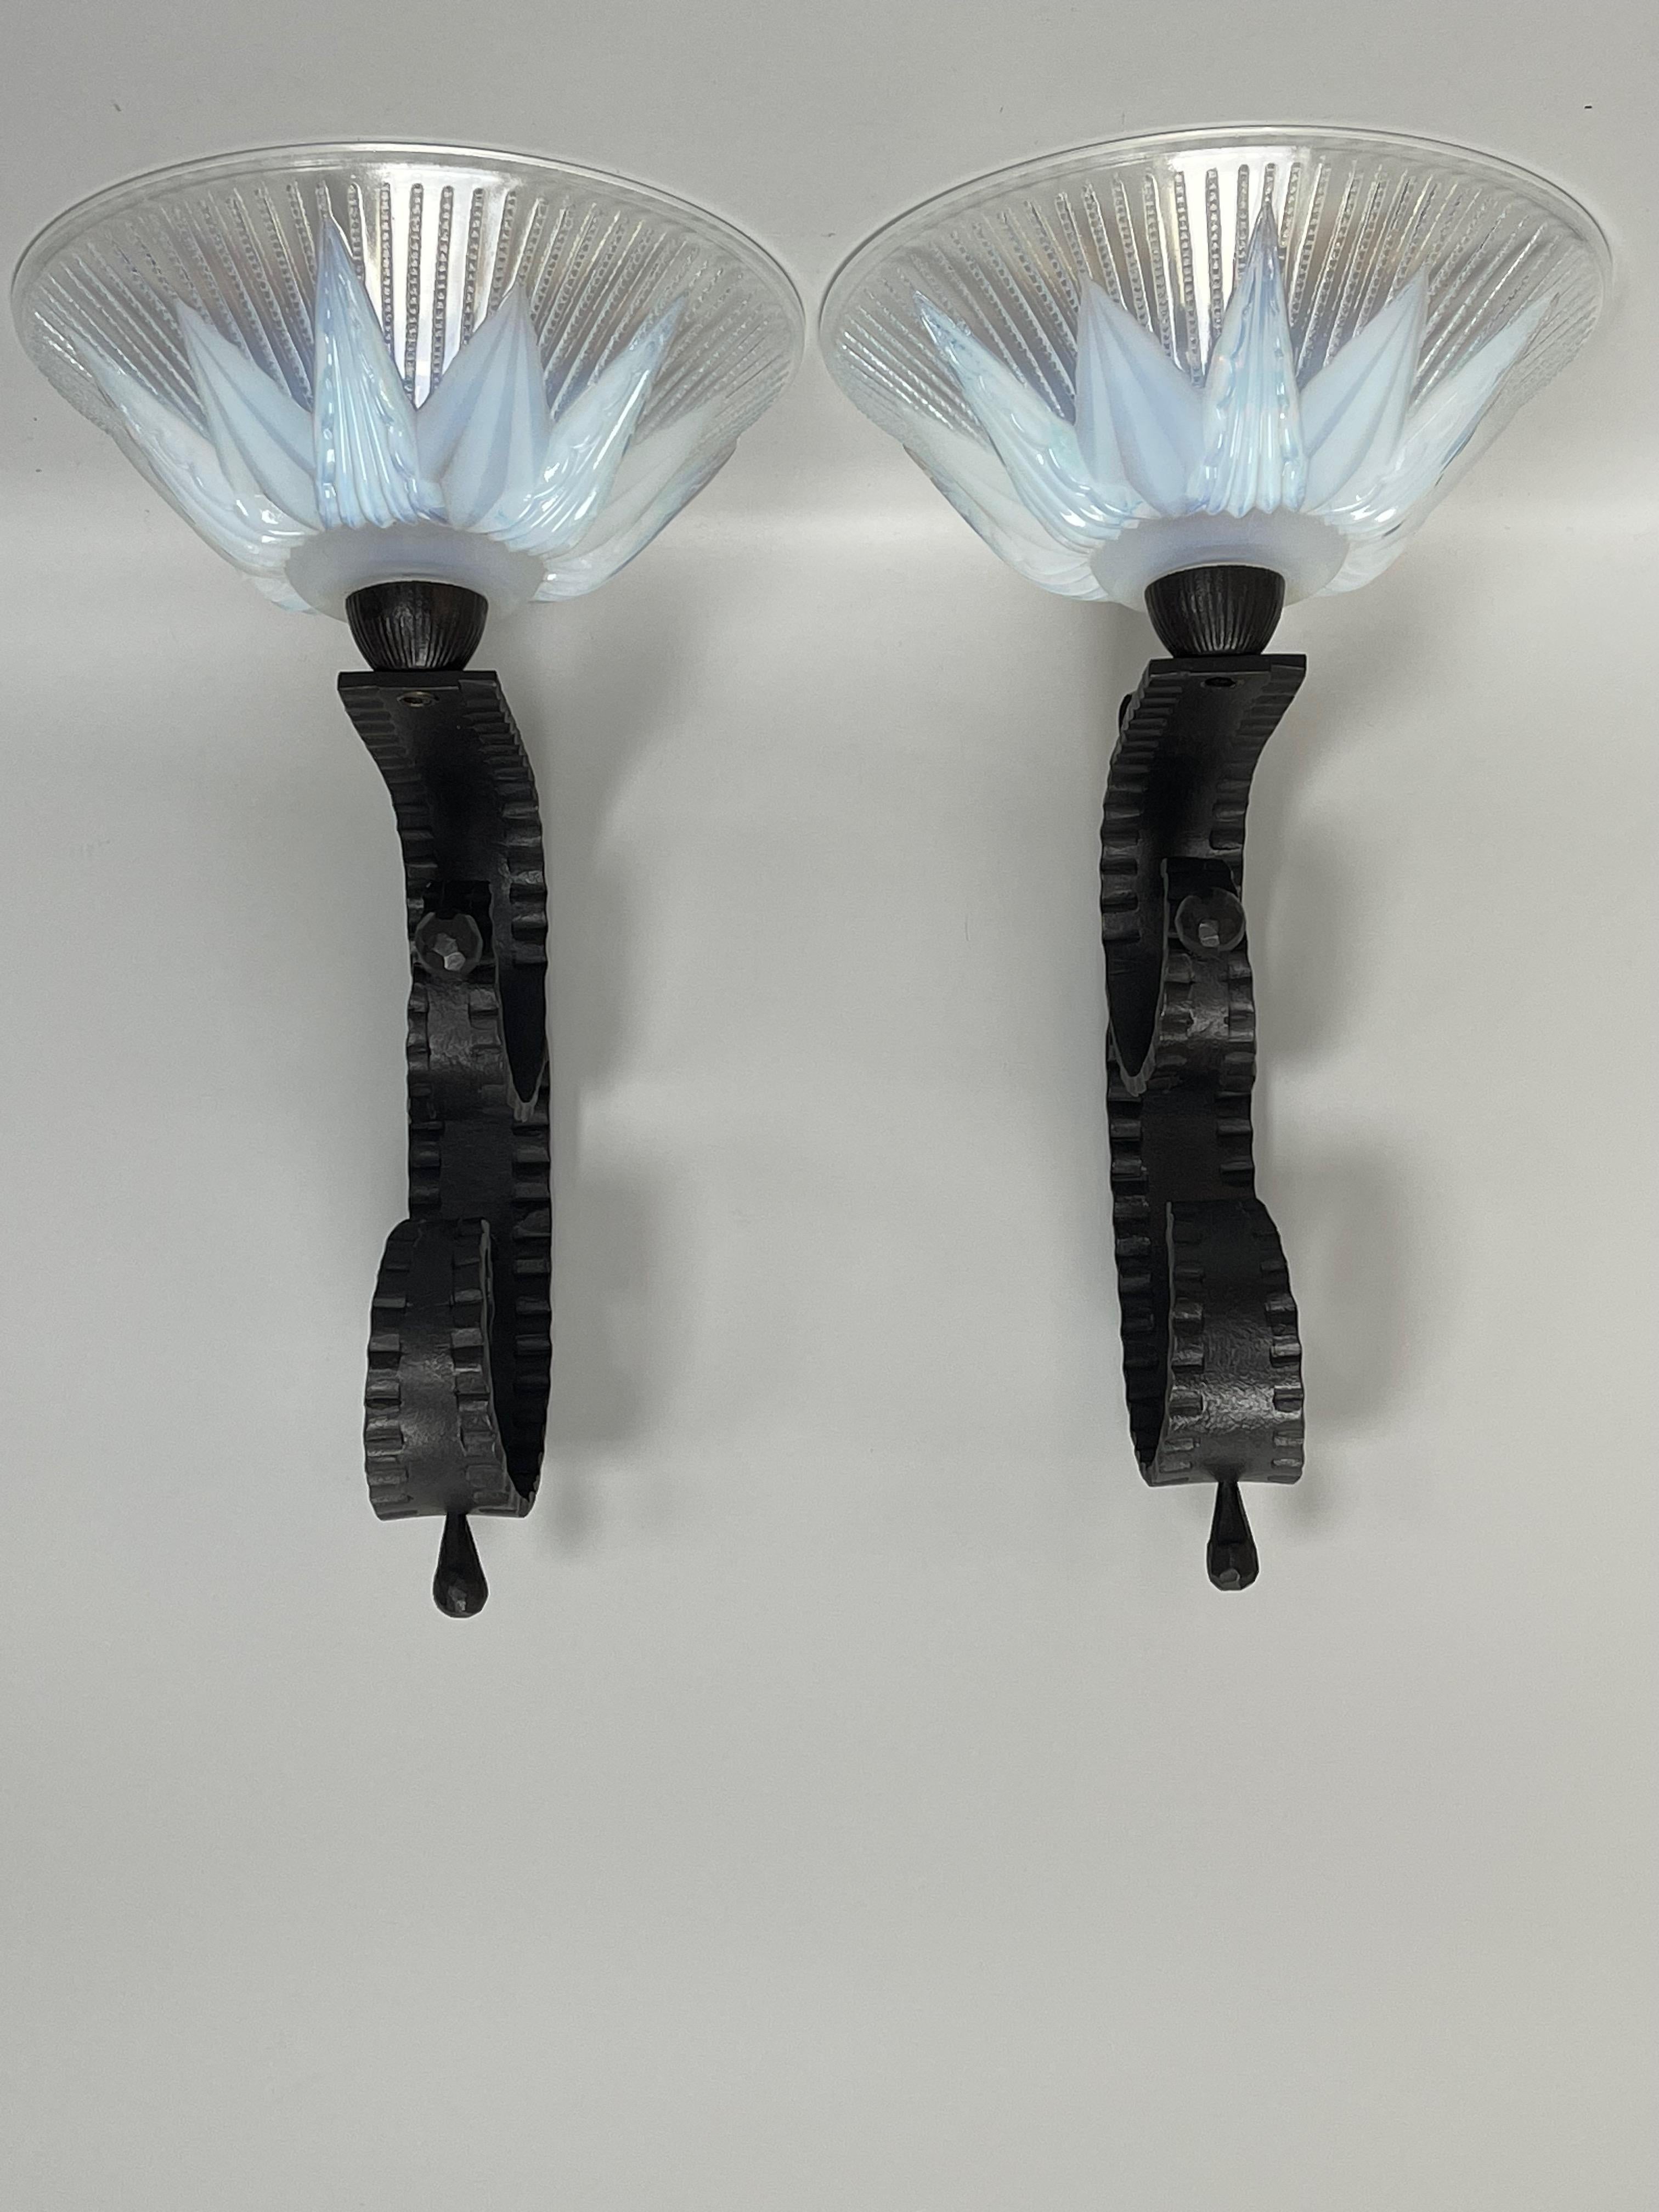 Pair of wall lights around 1930.
Hammered wrought iron and opalescent molded glass with geometric decoration by Ezan (unsigned).
These wall lights are electrified and in perfect condition.

Measures: Total height: 34 cm 13.38 in
Width: 20.5 cm